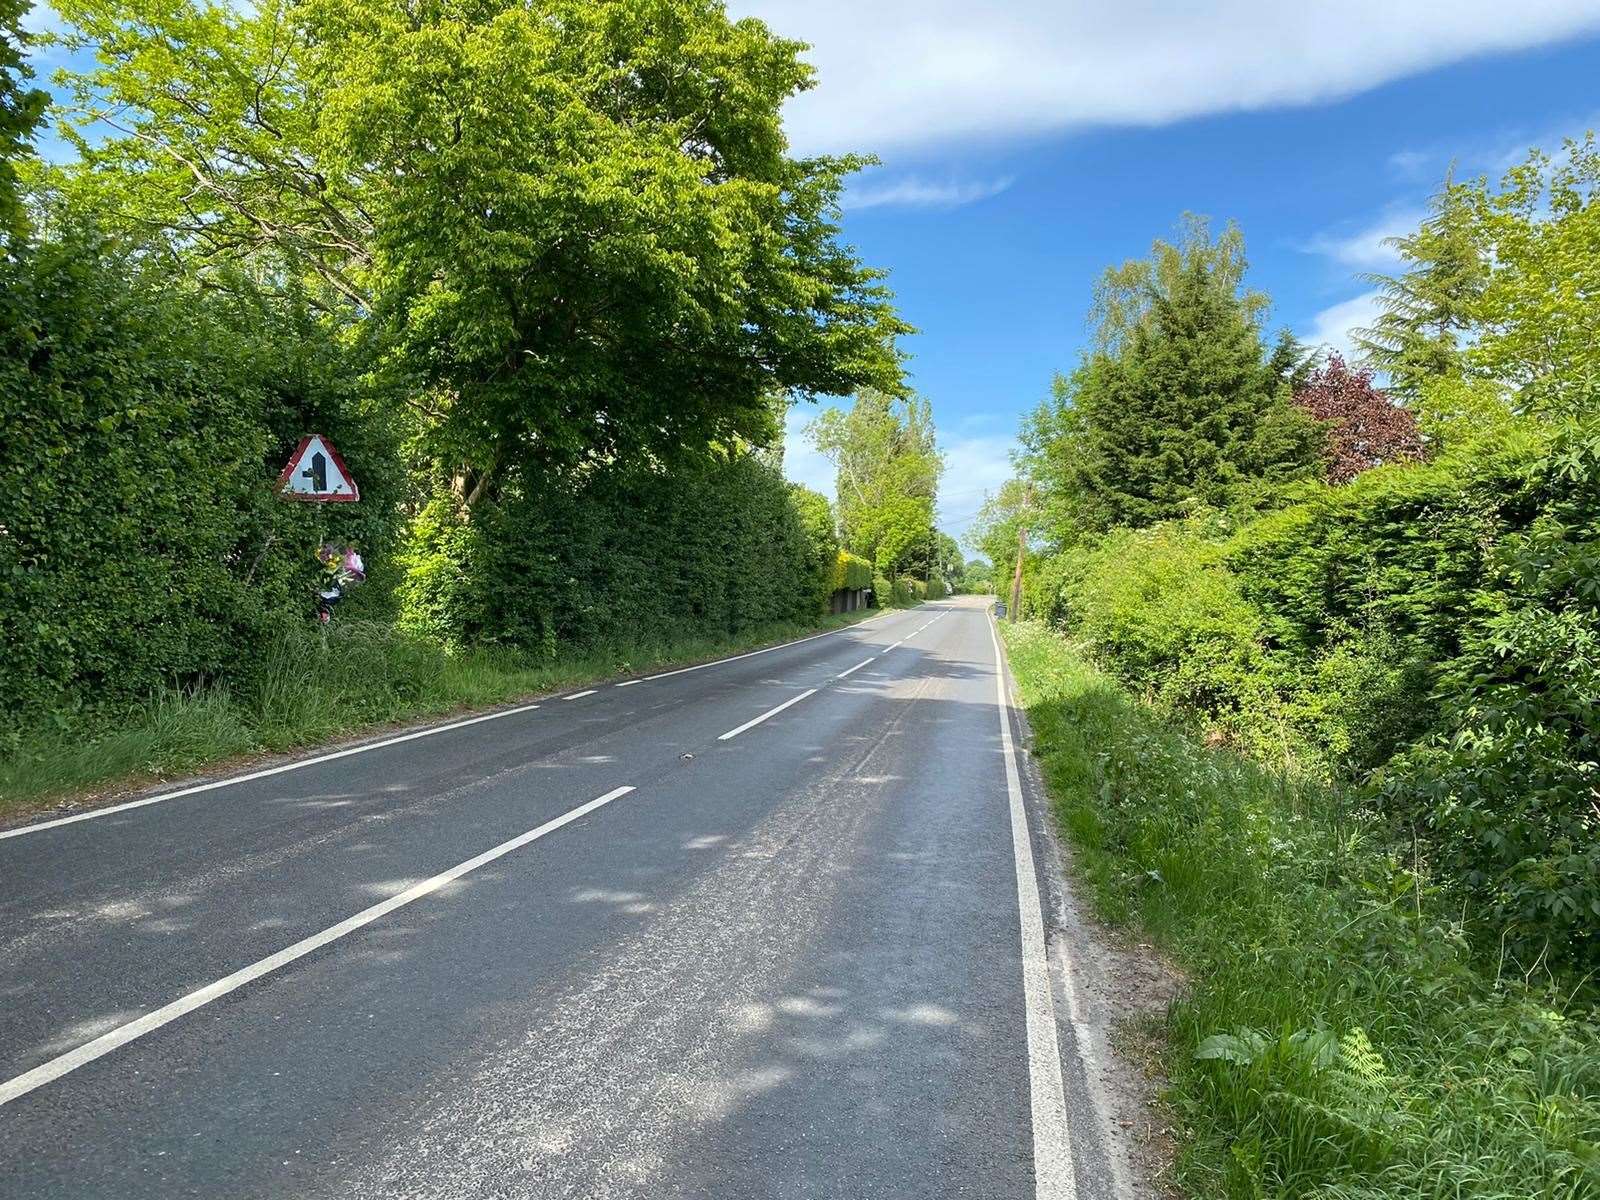 The crash happened on the A262 Sissinghurst Road. Photo: Barry Goodwin